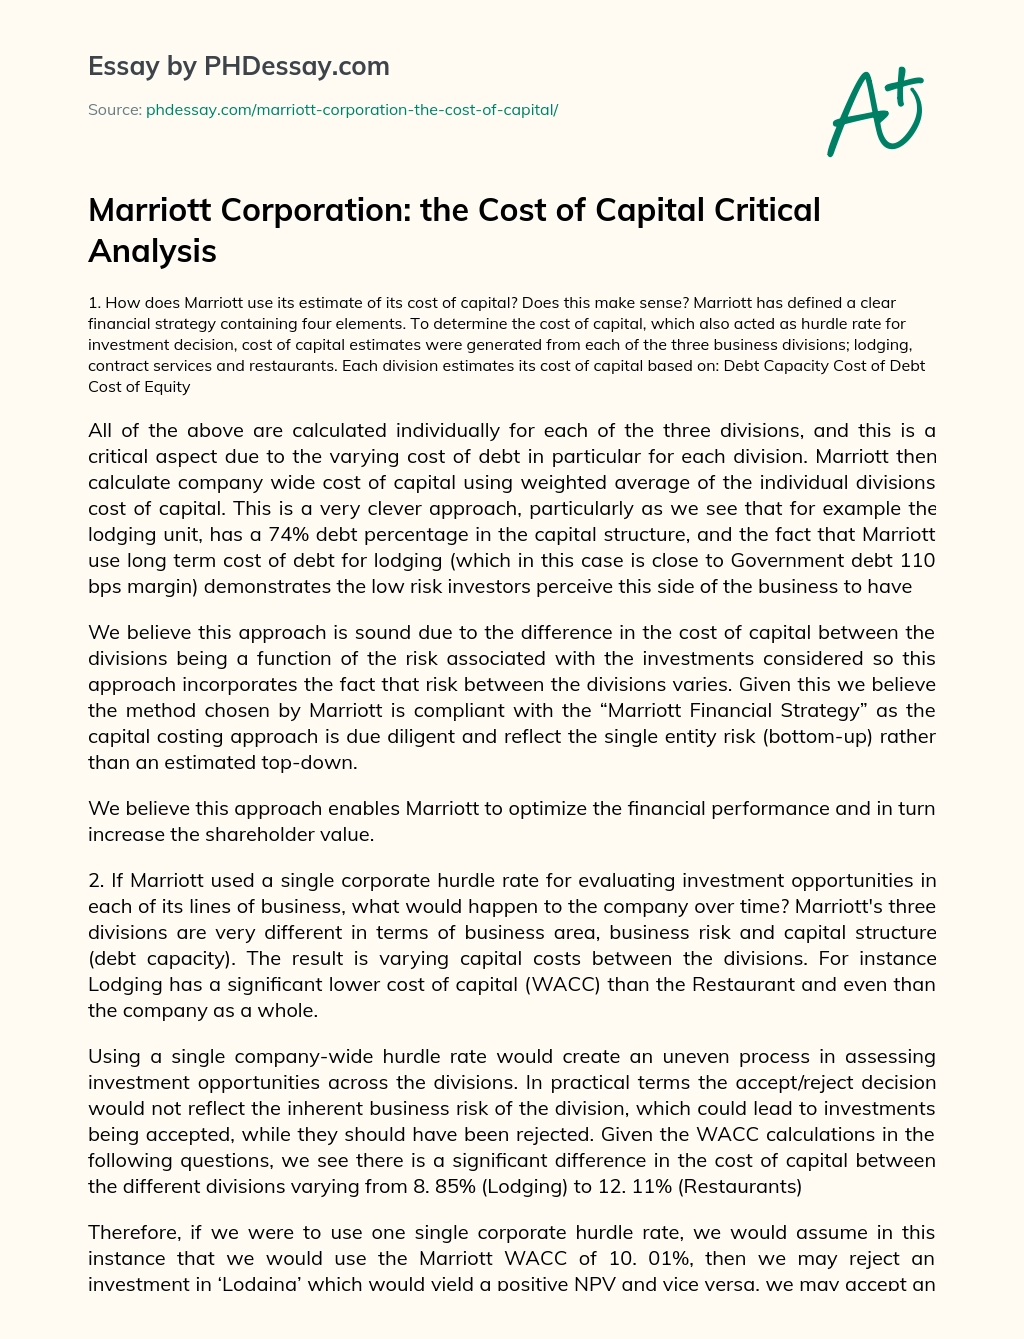 Marriott Corporation: the Cost of Capital Critical Analysis essay